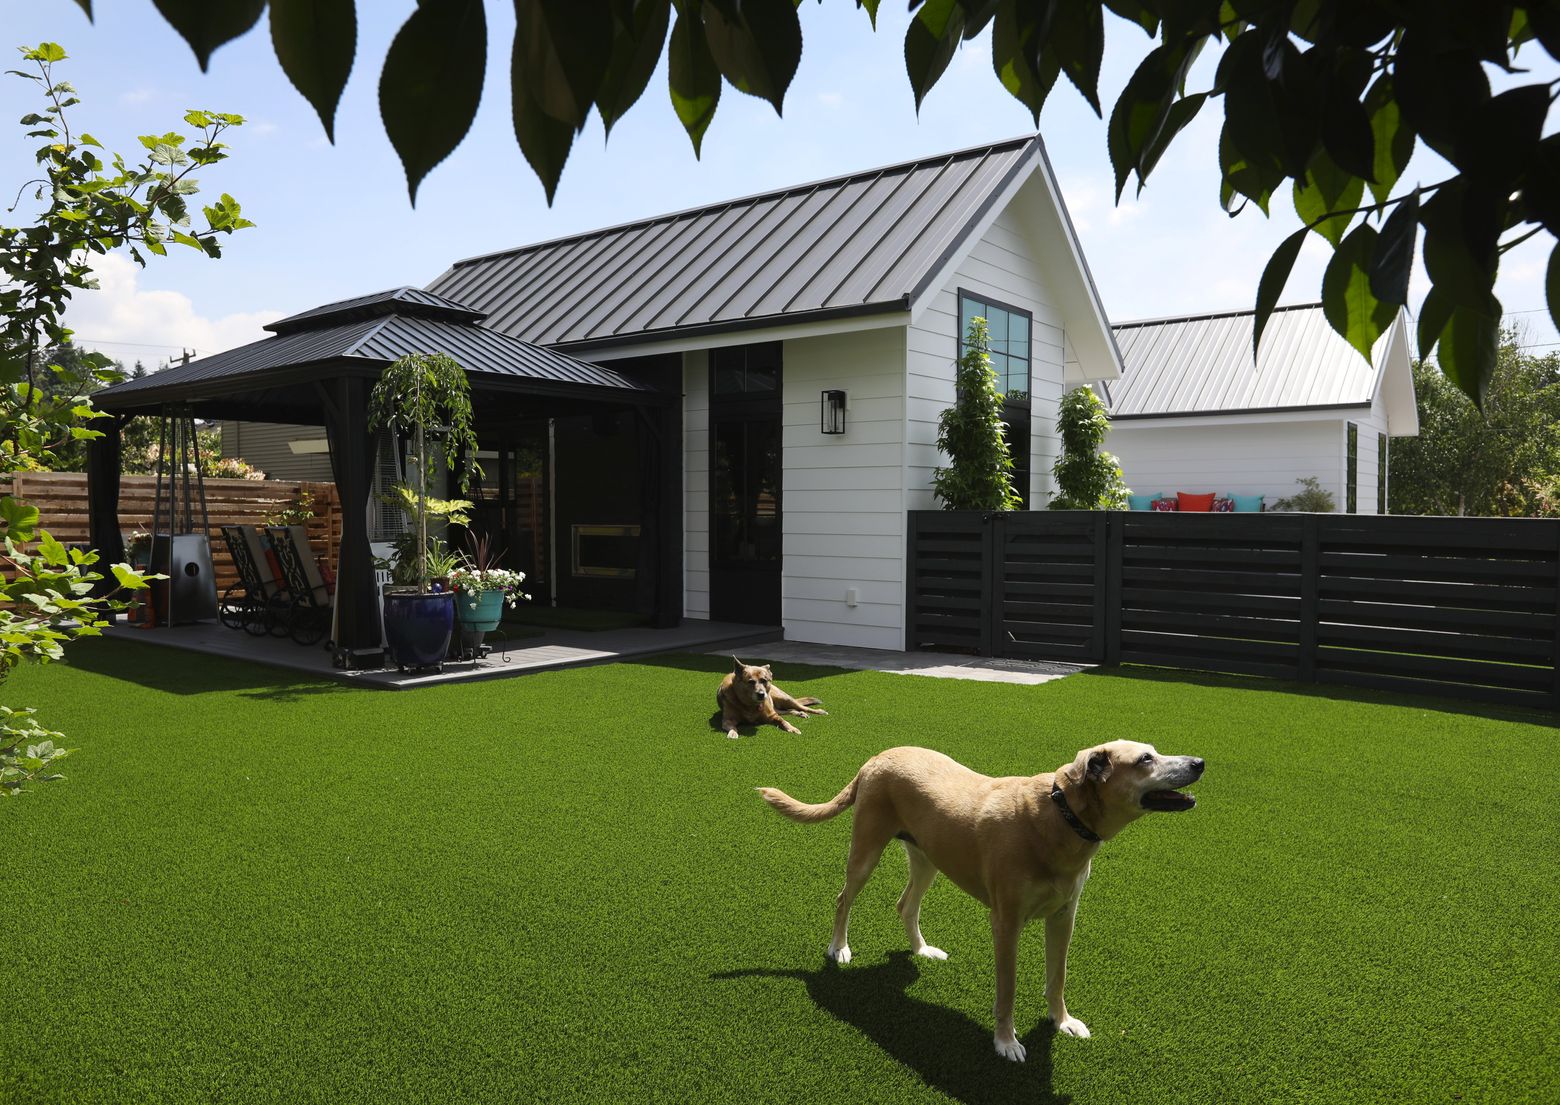 “We redid this whole area,” homeowner Heather says of the side yard, which originally was split in half by a row of camellias. “There’s all-new fencing and artificial grass for the dogs. My husband built the canopy, and we’re out here a lot with the dogs.” (Ken Lambert / The Seattle Times)